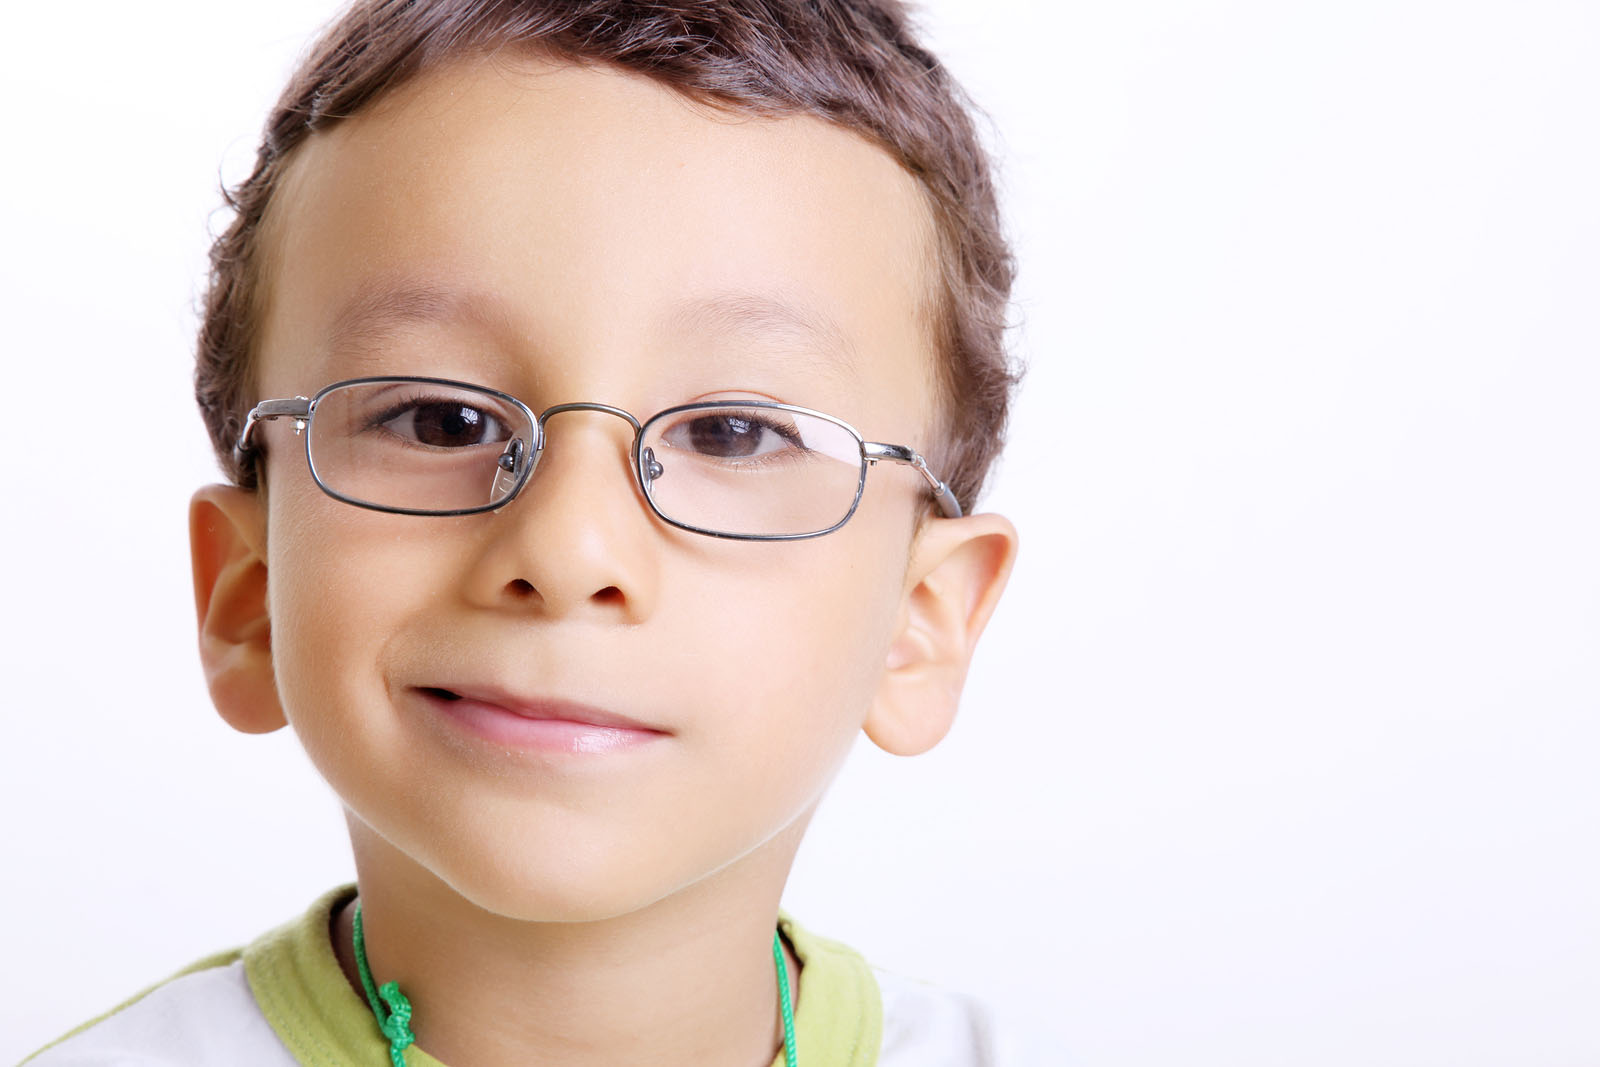 Eye exams are important for everyone, especially your children! Contact our Plano optometrist today to learn more about the benefits of pediatric eye exams.